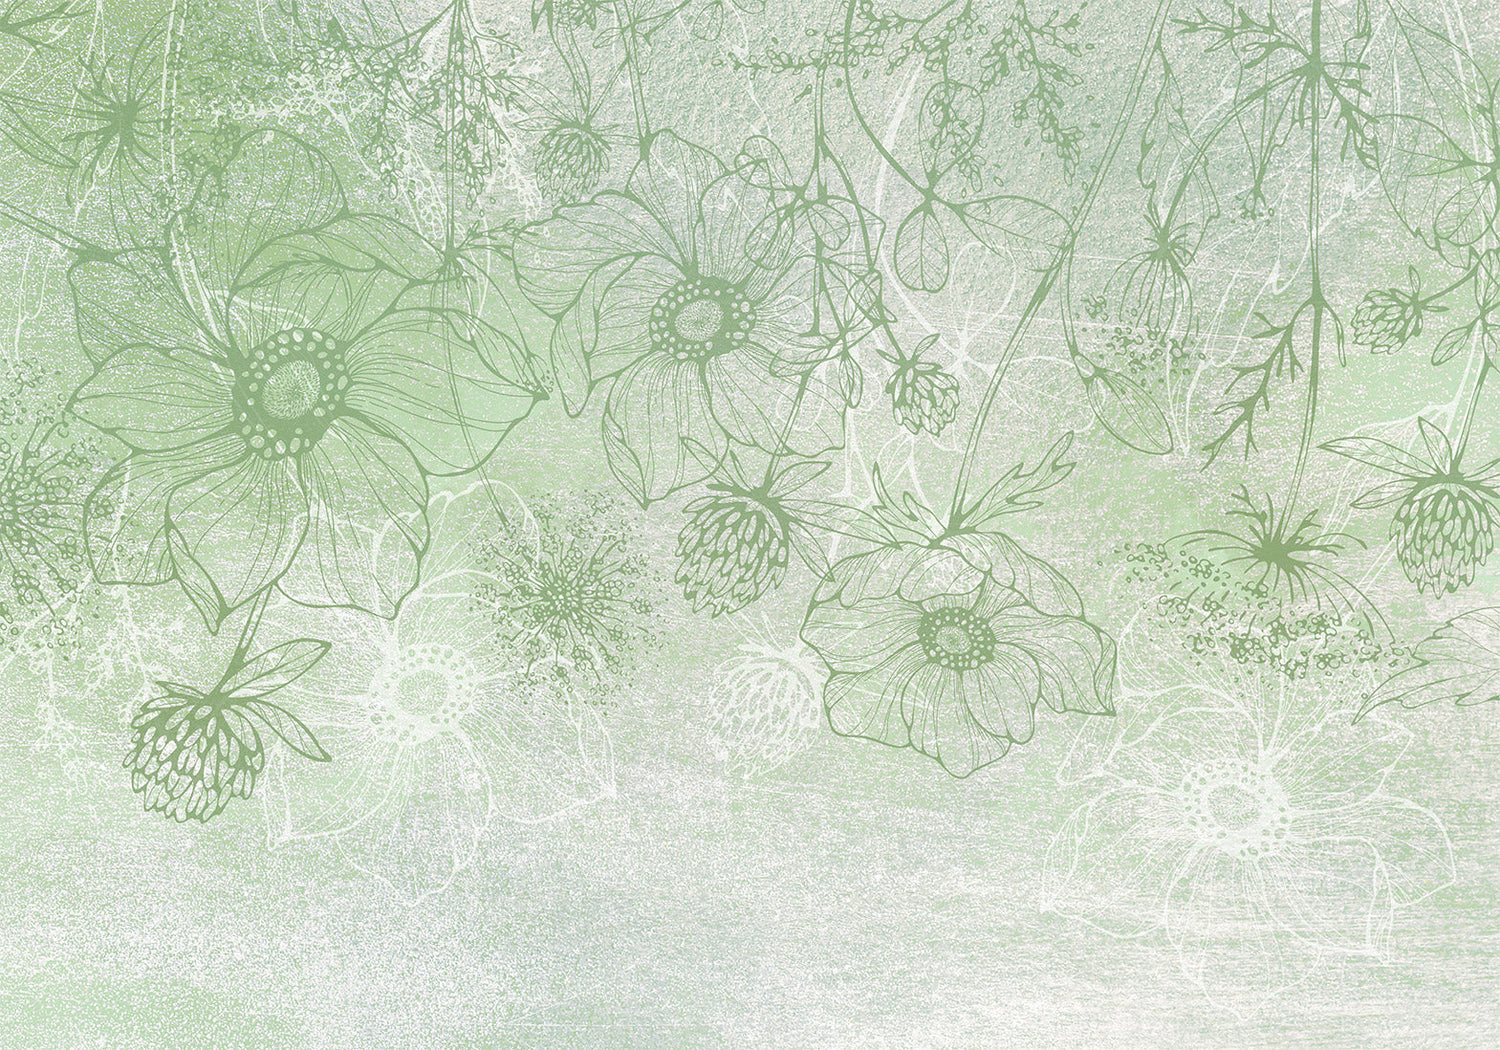 Peel & Stick Botanical Wall Mural - Floral Green Lineart - Removable Wallpaper